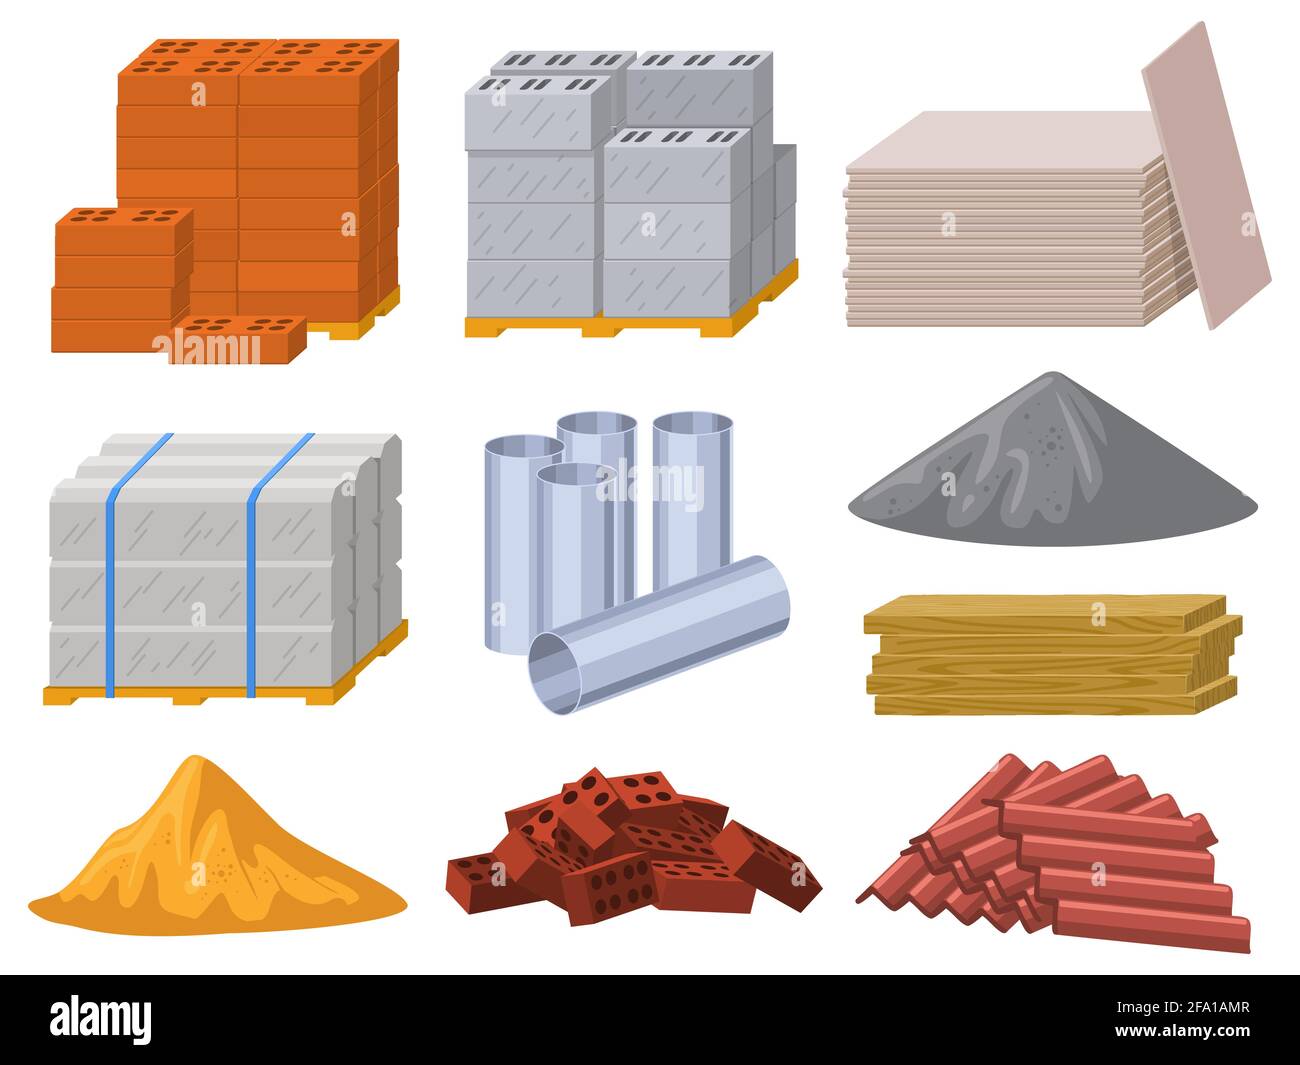 Building materials. Construction industry bricks, cement, wooden planks and metal pipes vector illustration set. Building insulation or roofing Stock Vector